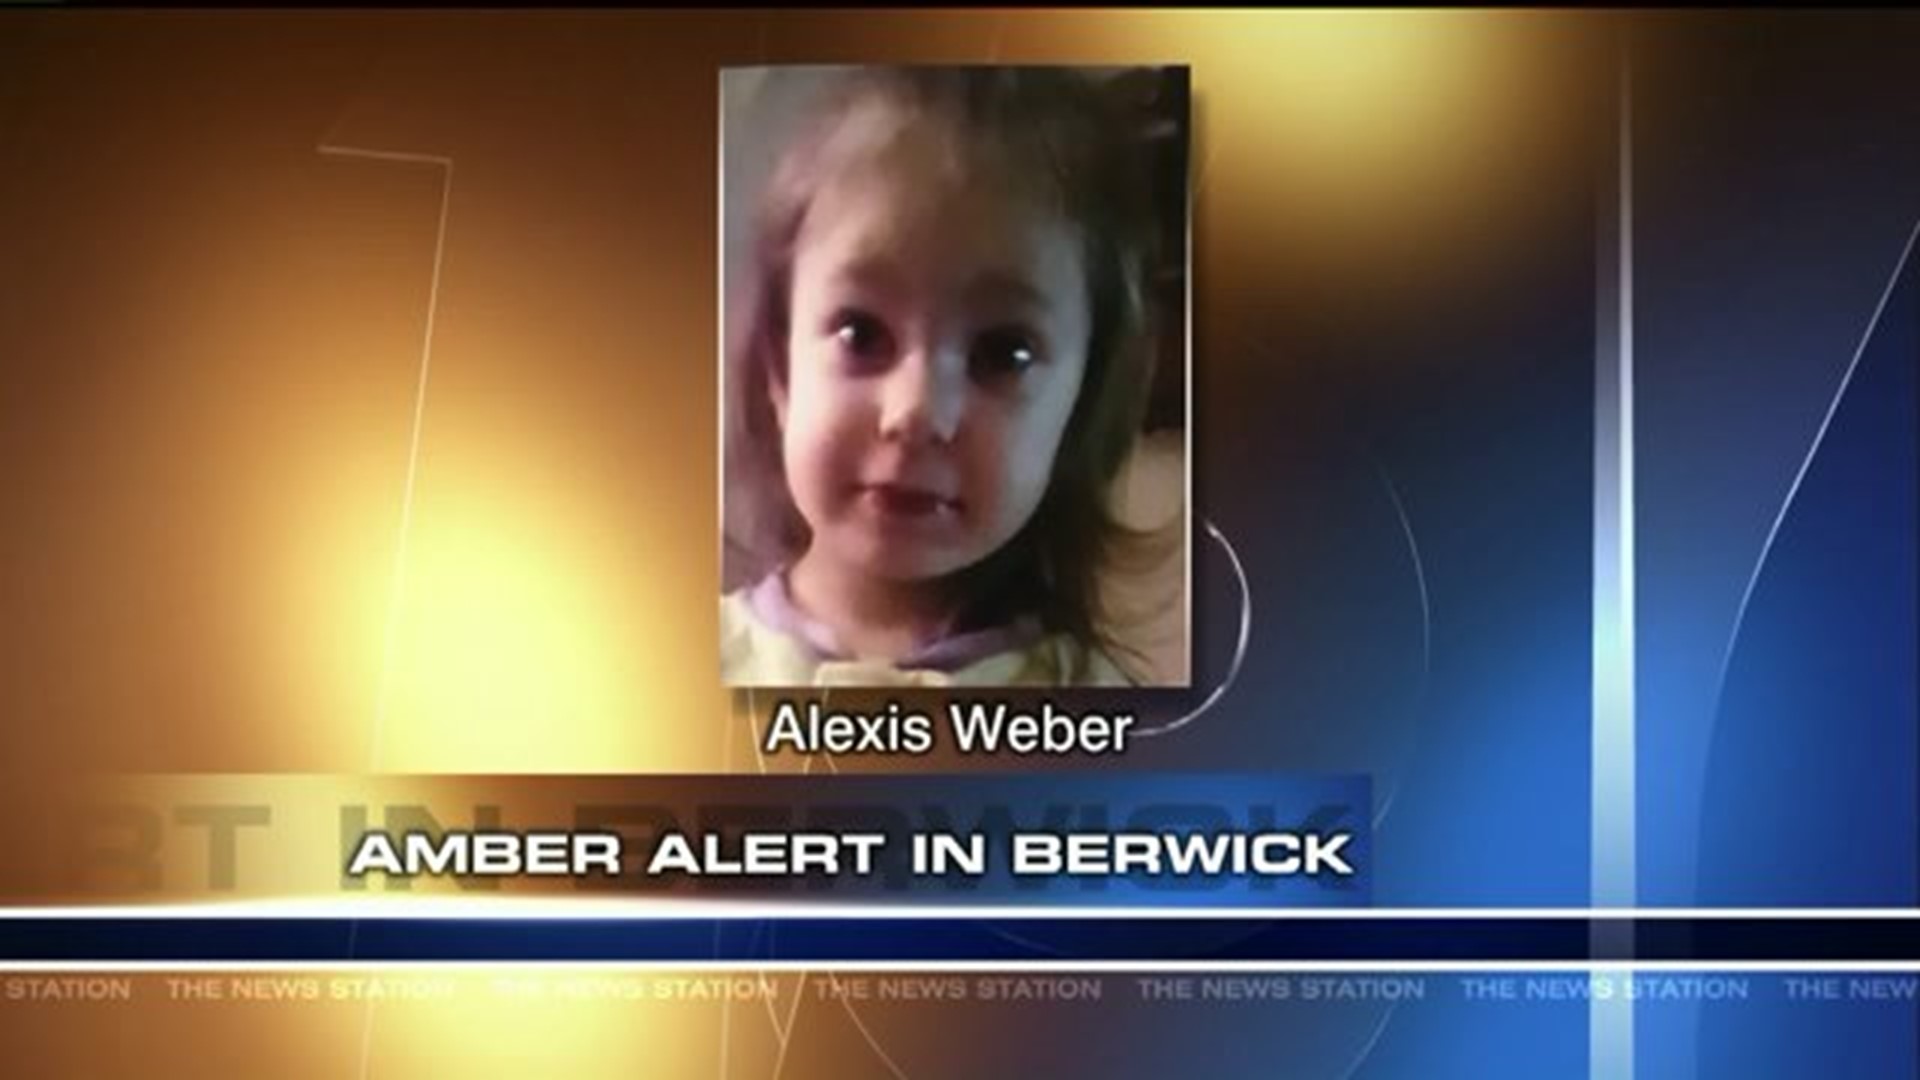 Amber Alert Issued for 2-Year-Old Girl Abducted from Berwick